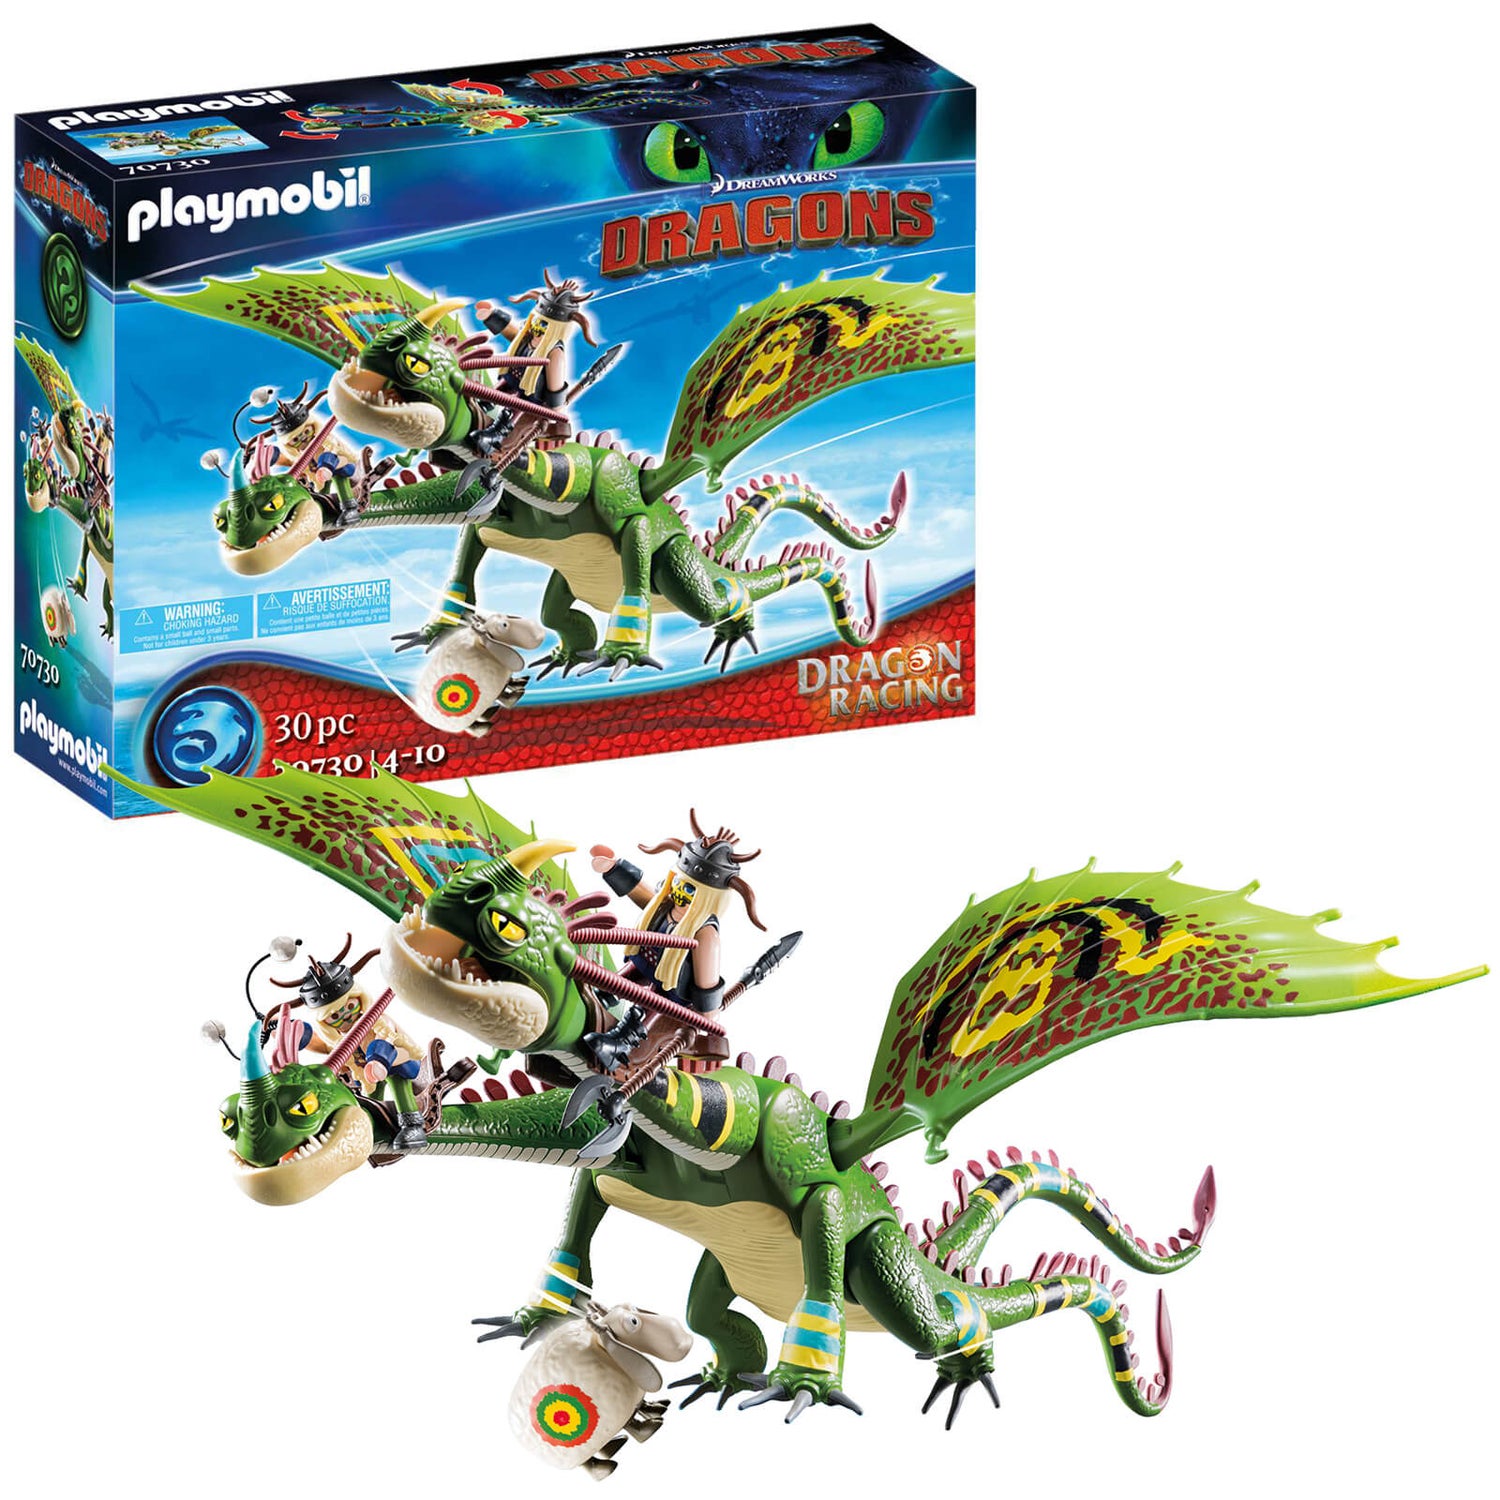 Playmobil Dragon Racing: Ruffnut and Tuffnut with Barf and Belch (70730)